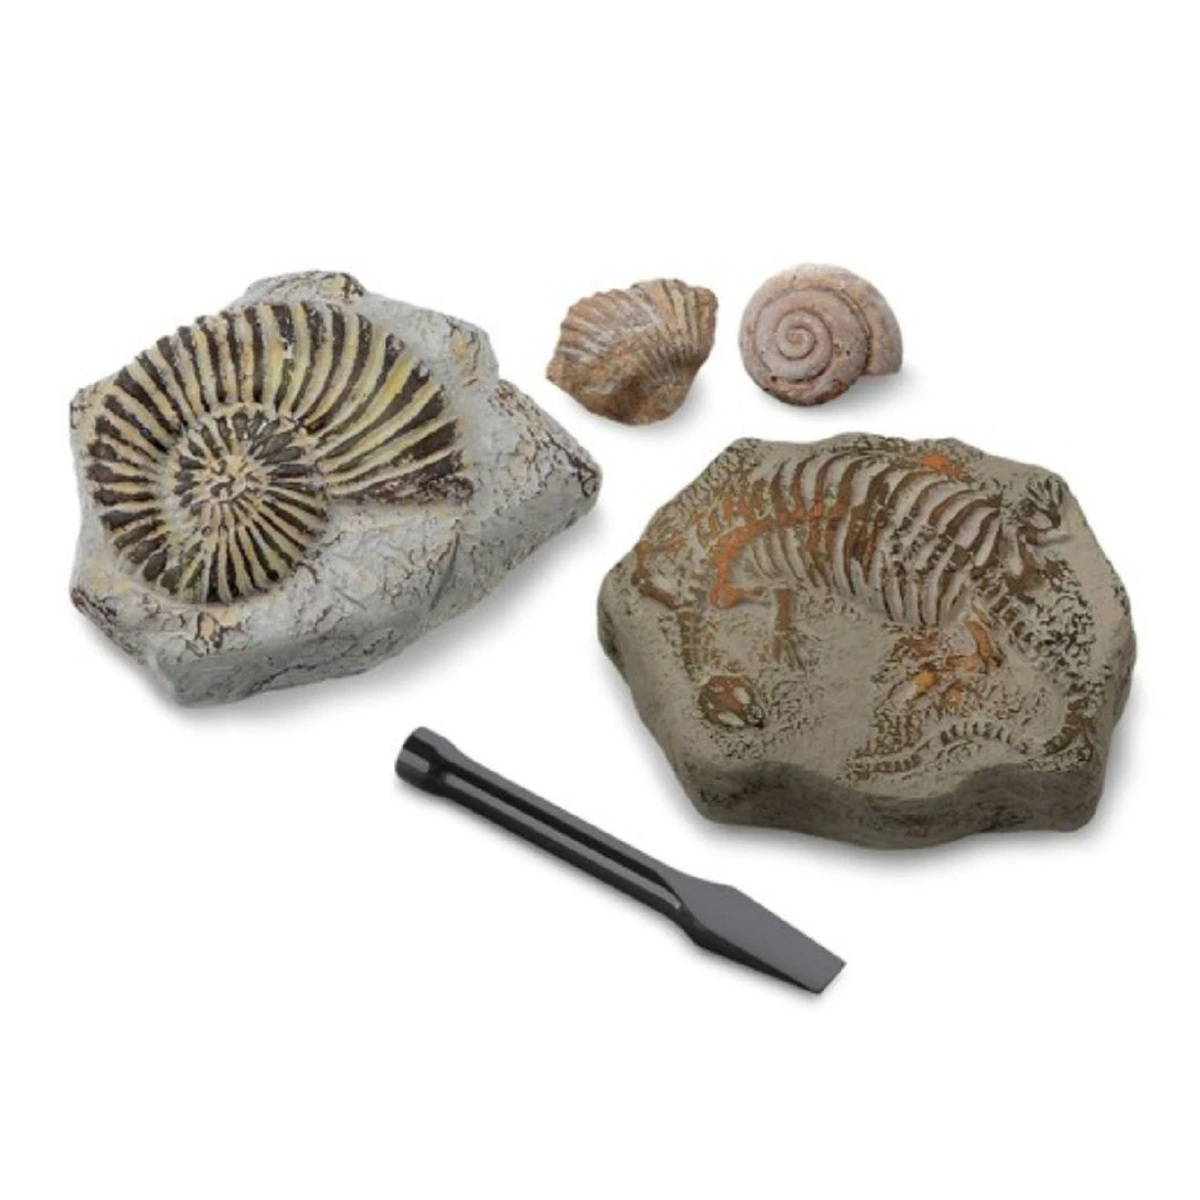 Discovery Kids Toy Excavation Science Kit Mini Fossil 2pc 14230047